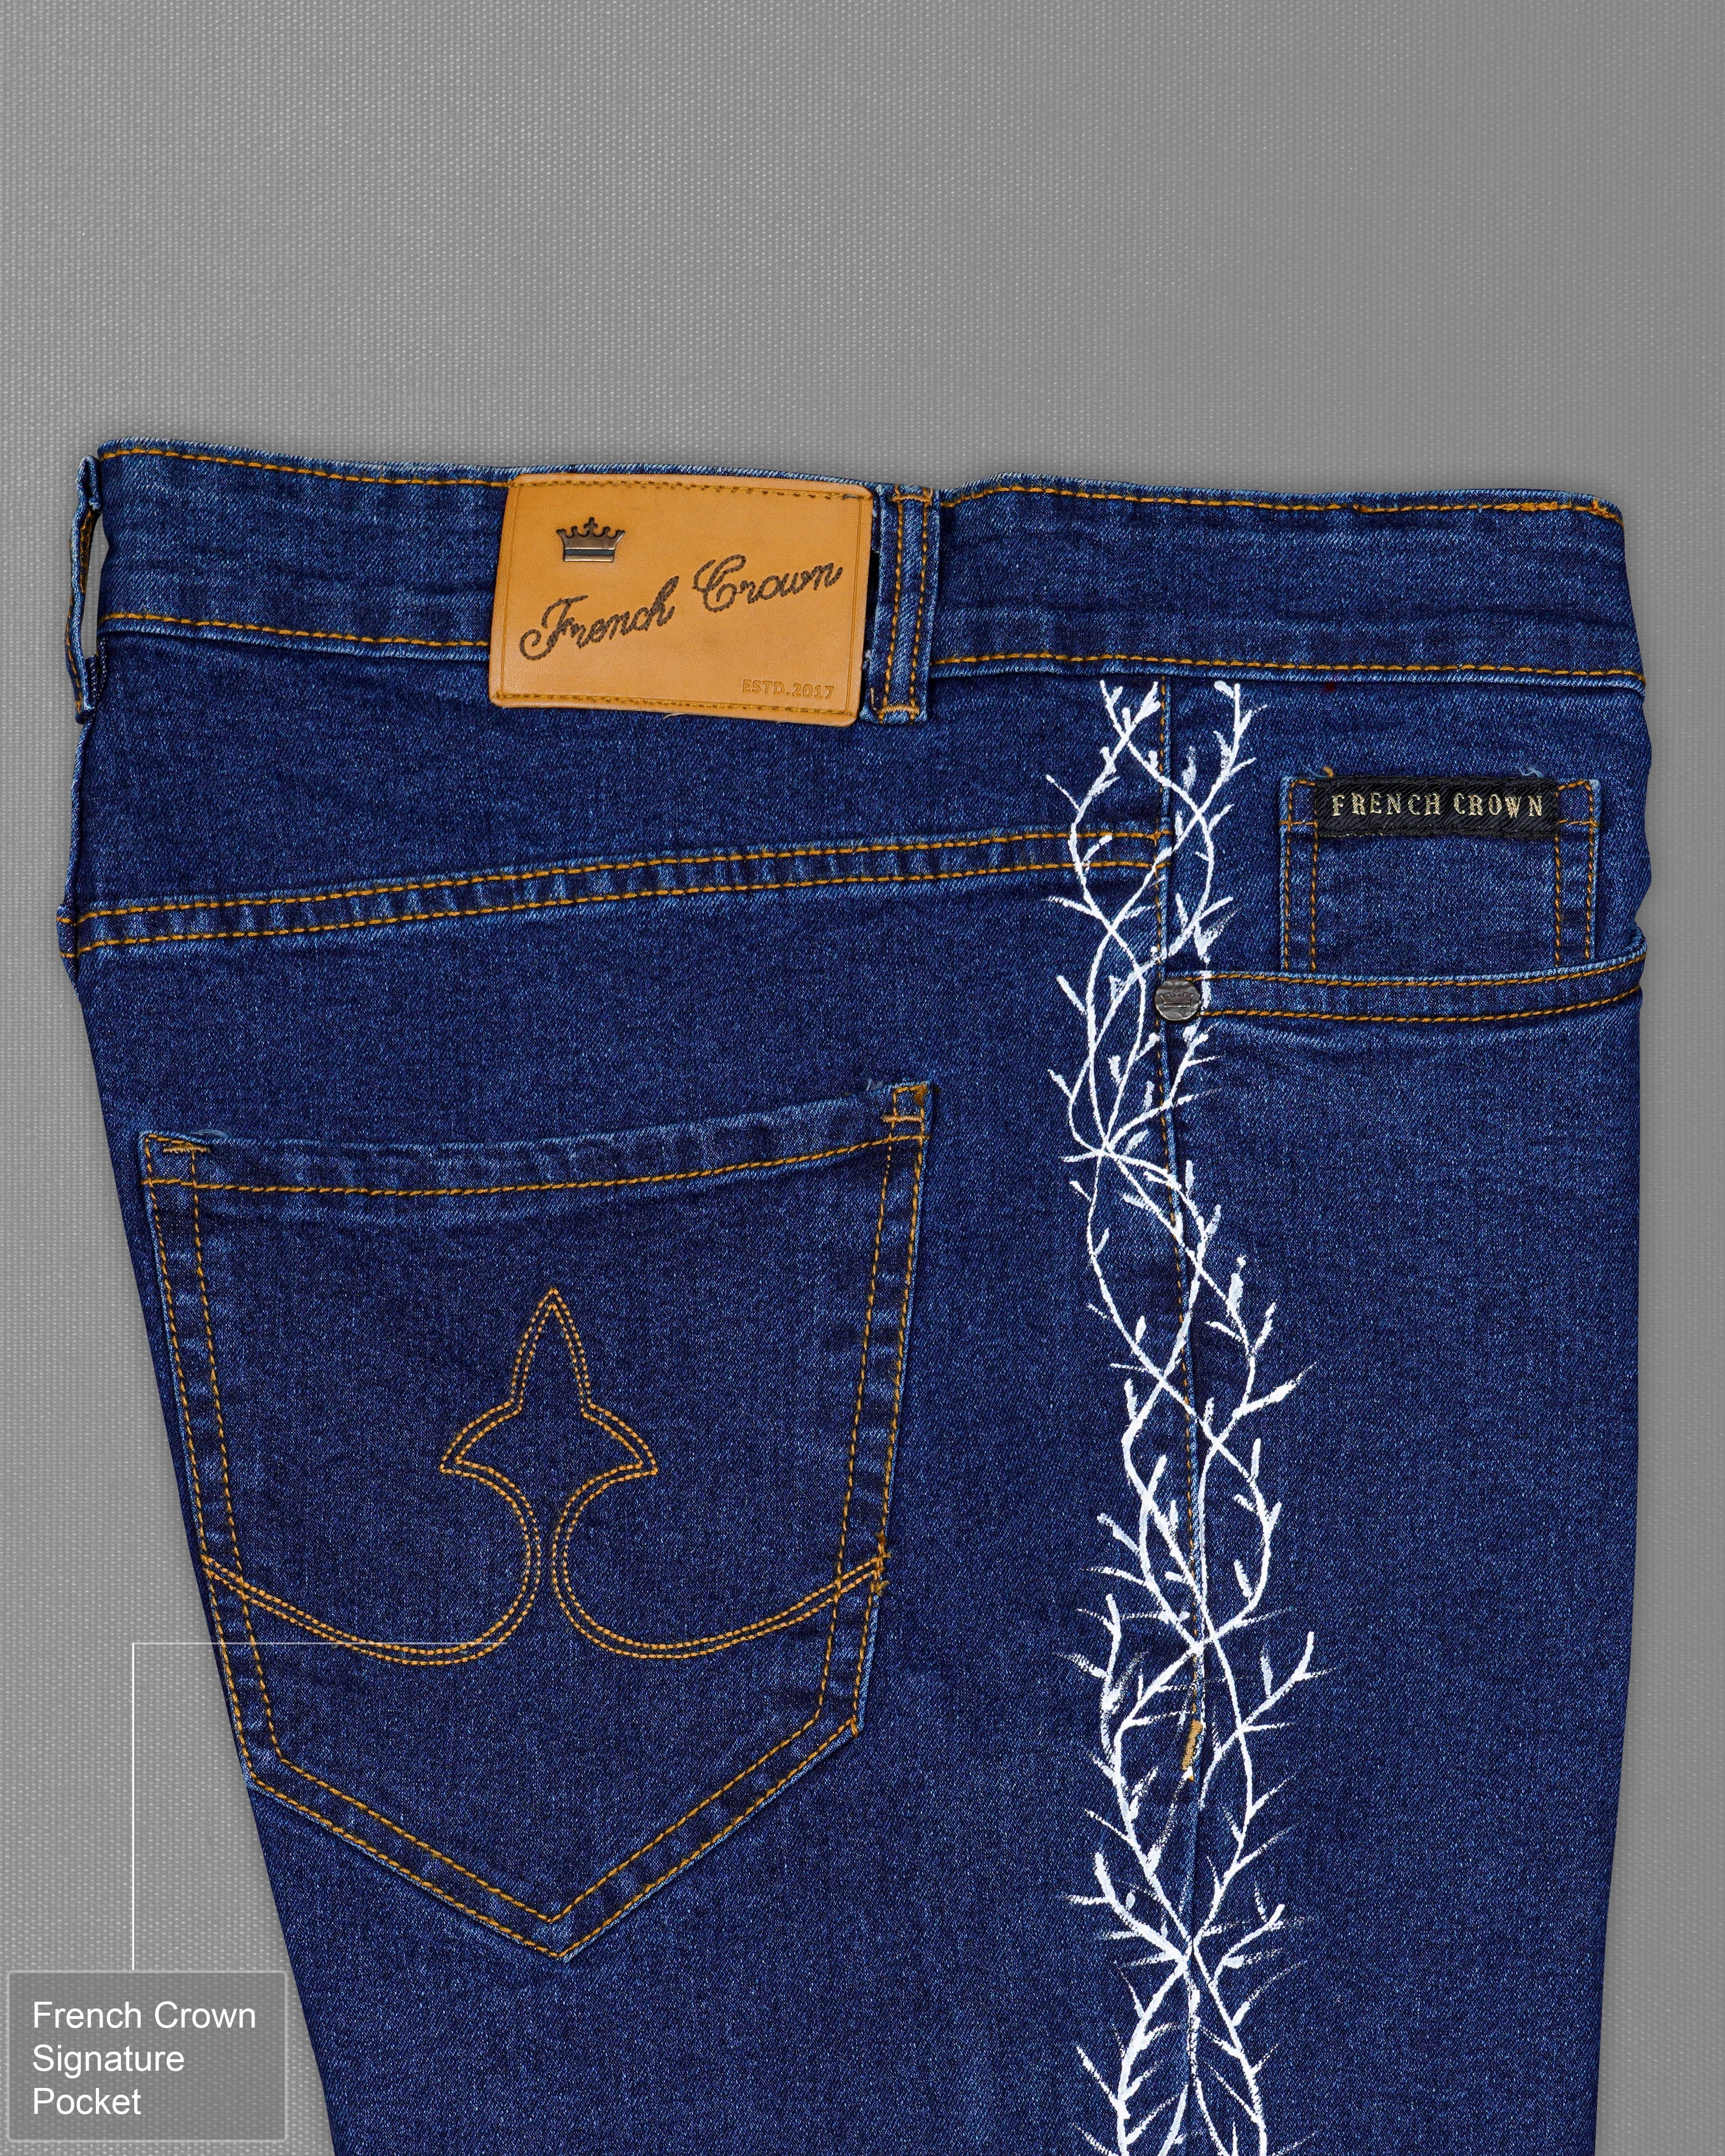 Downriver Blue Stone Wash Hand Painted Stretchable Denim J094-ART001-30, J094-ART001-32, J094-ART001-34, J094-ART001-36, J094-ART001-38, J094-ART001-40